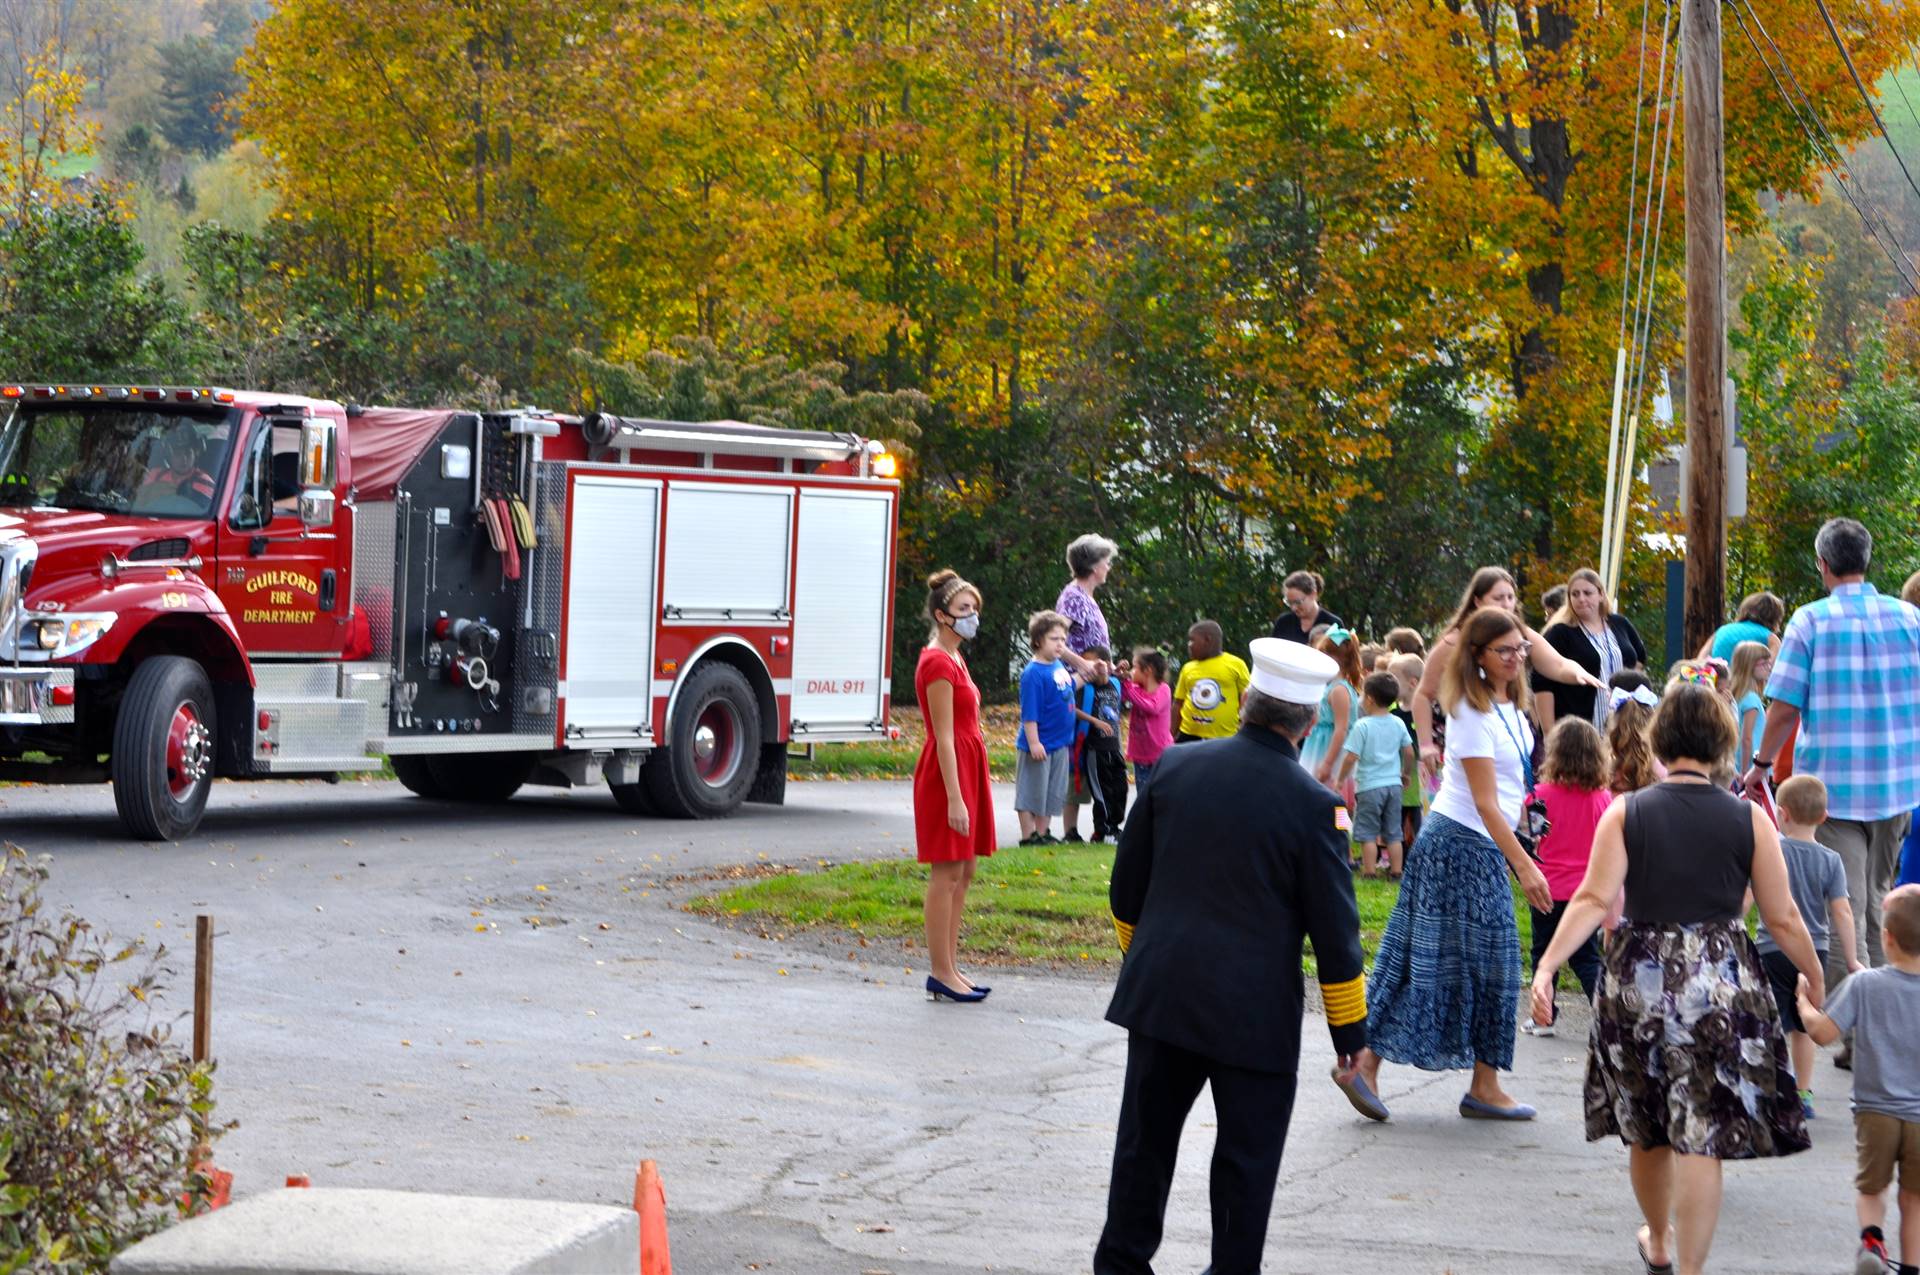 A fire truck arrives as students watch.